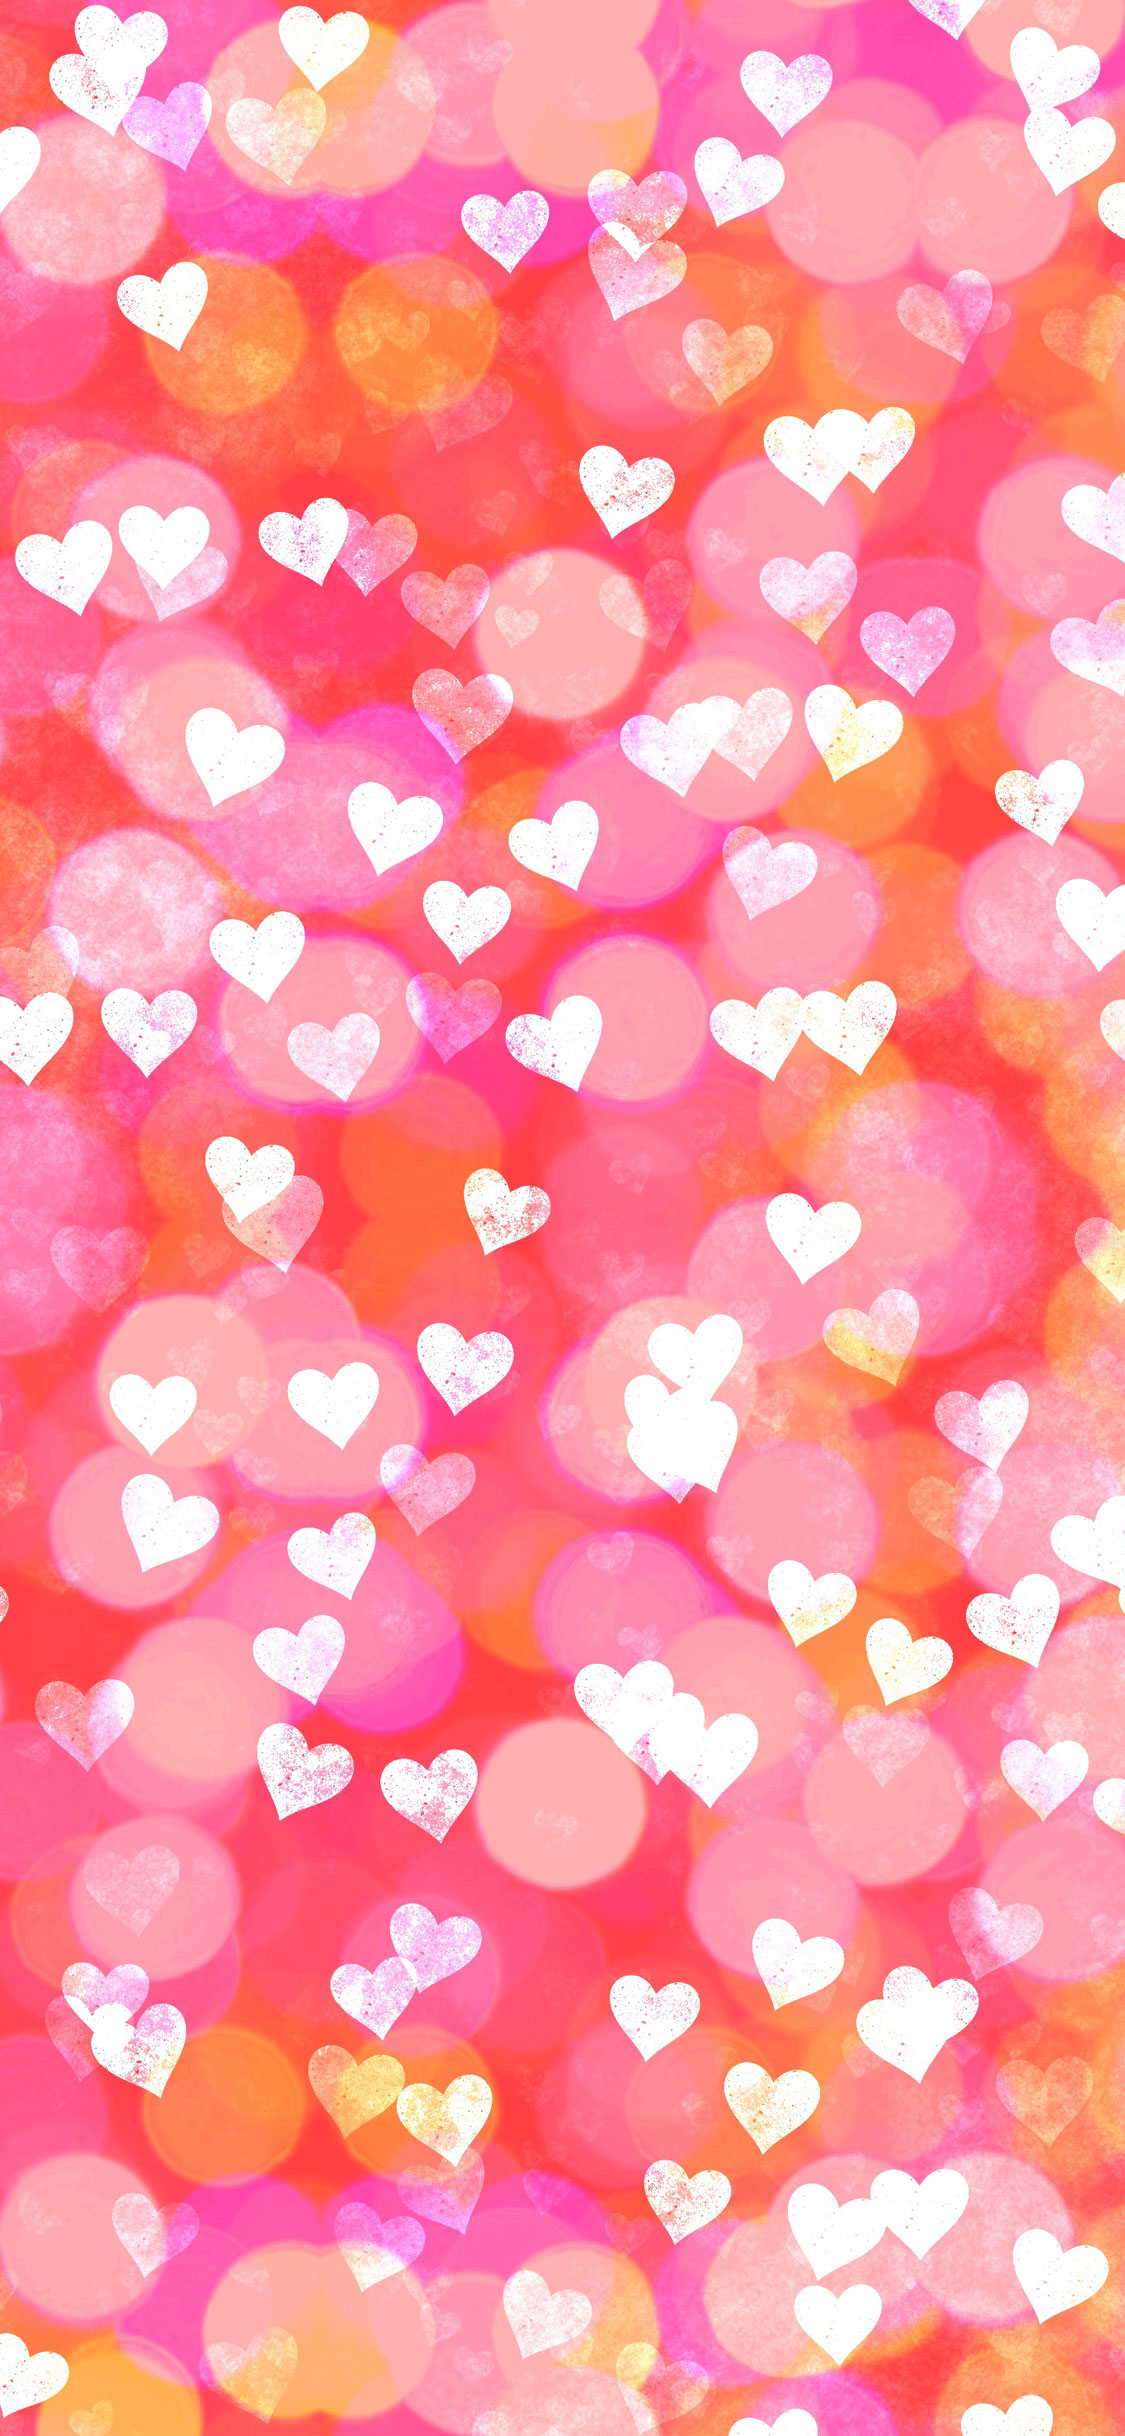 Hearts iPhone Background Pics